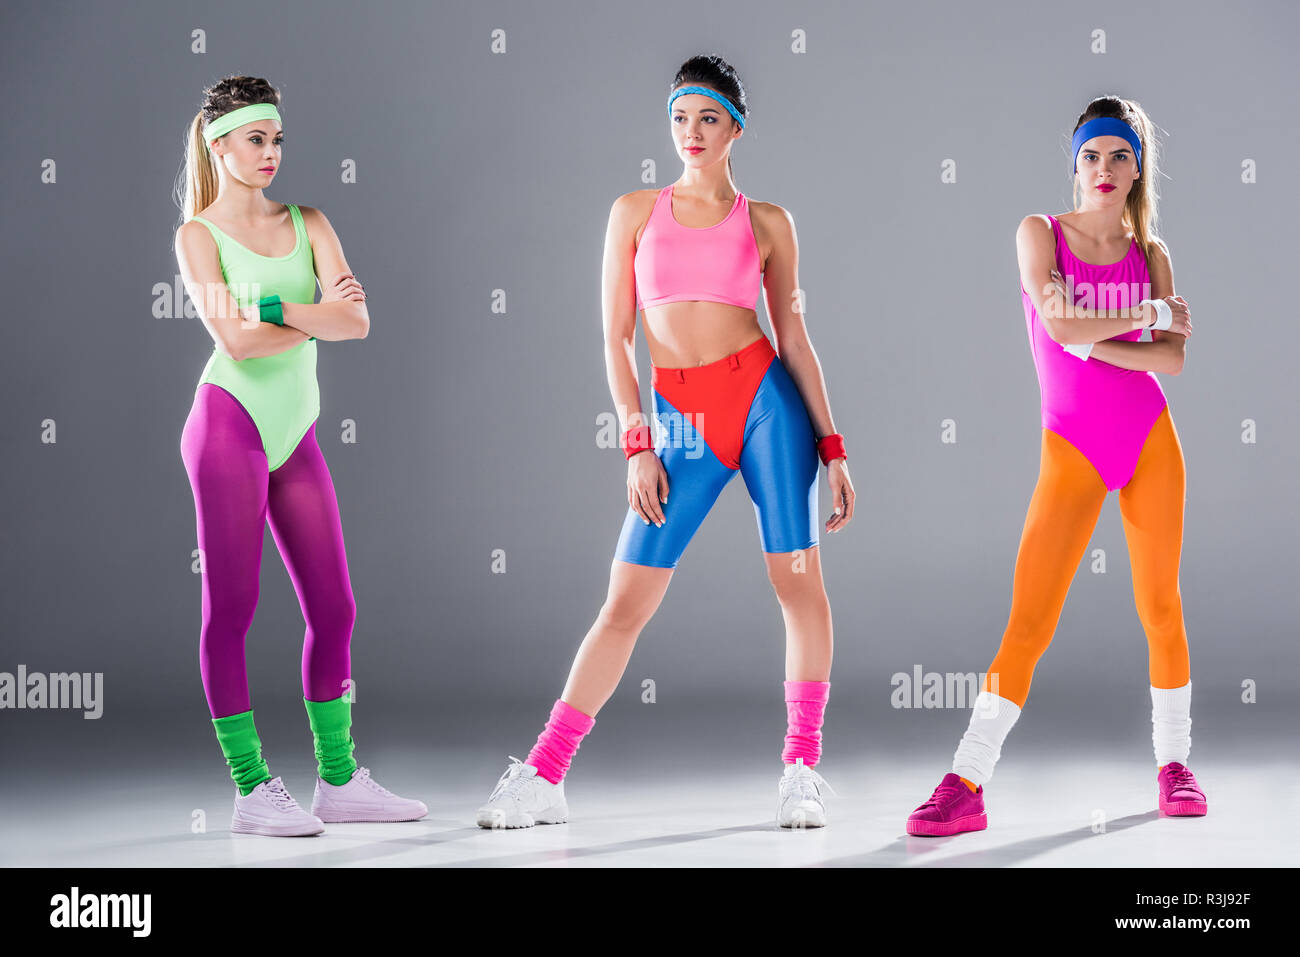 full length view of athletic young women in 80s style sportswear